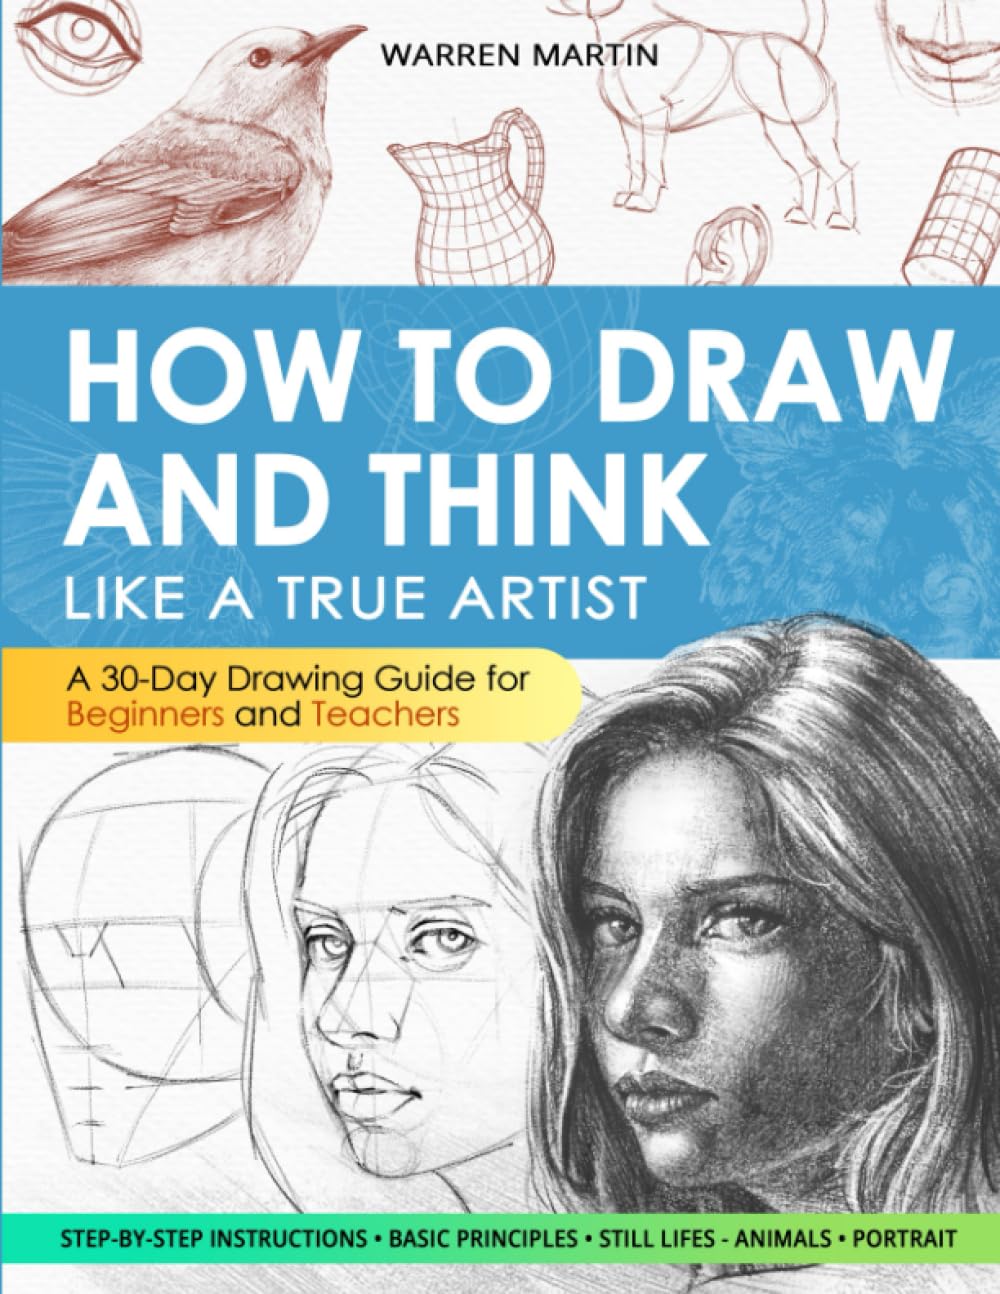 How to draw and think like a true artist: A 30-day Drawing Guide - From the Fundamentals to Step-by-Step Instructions with Detailed Illustrations and Comprehensive Explanations